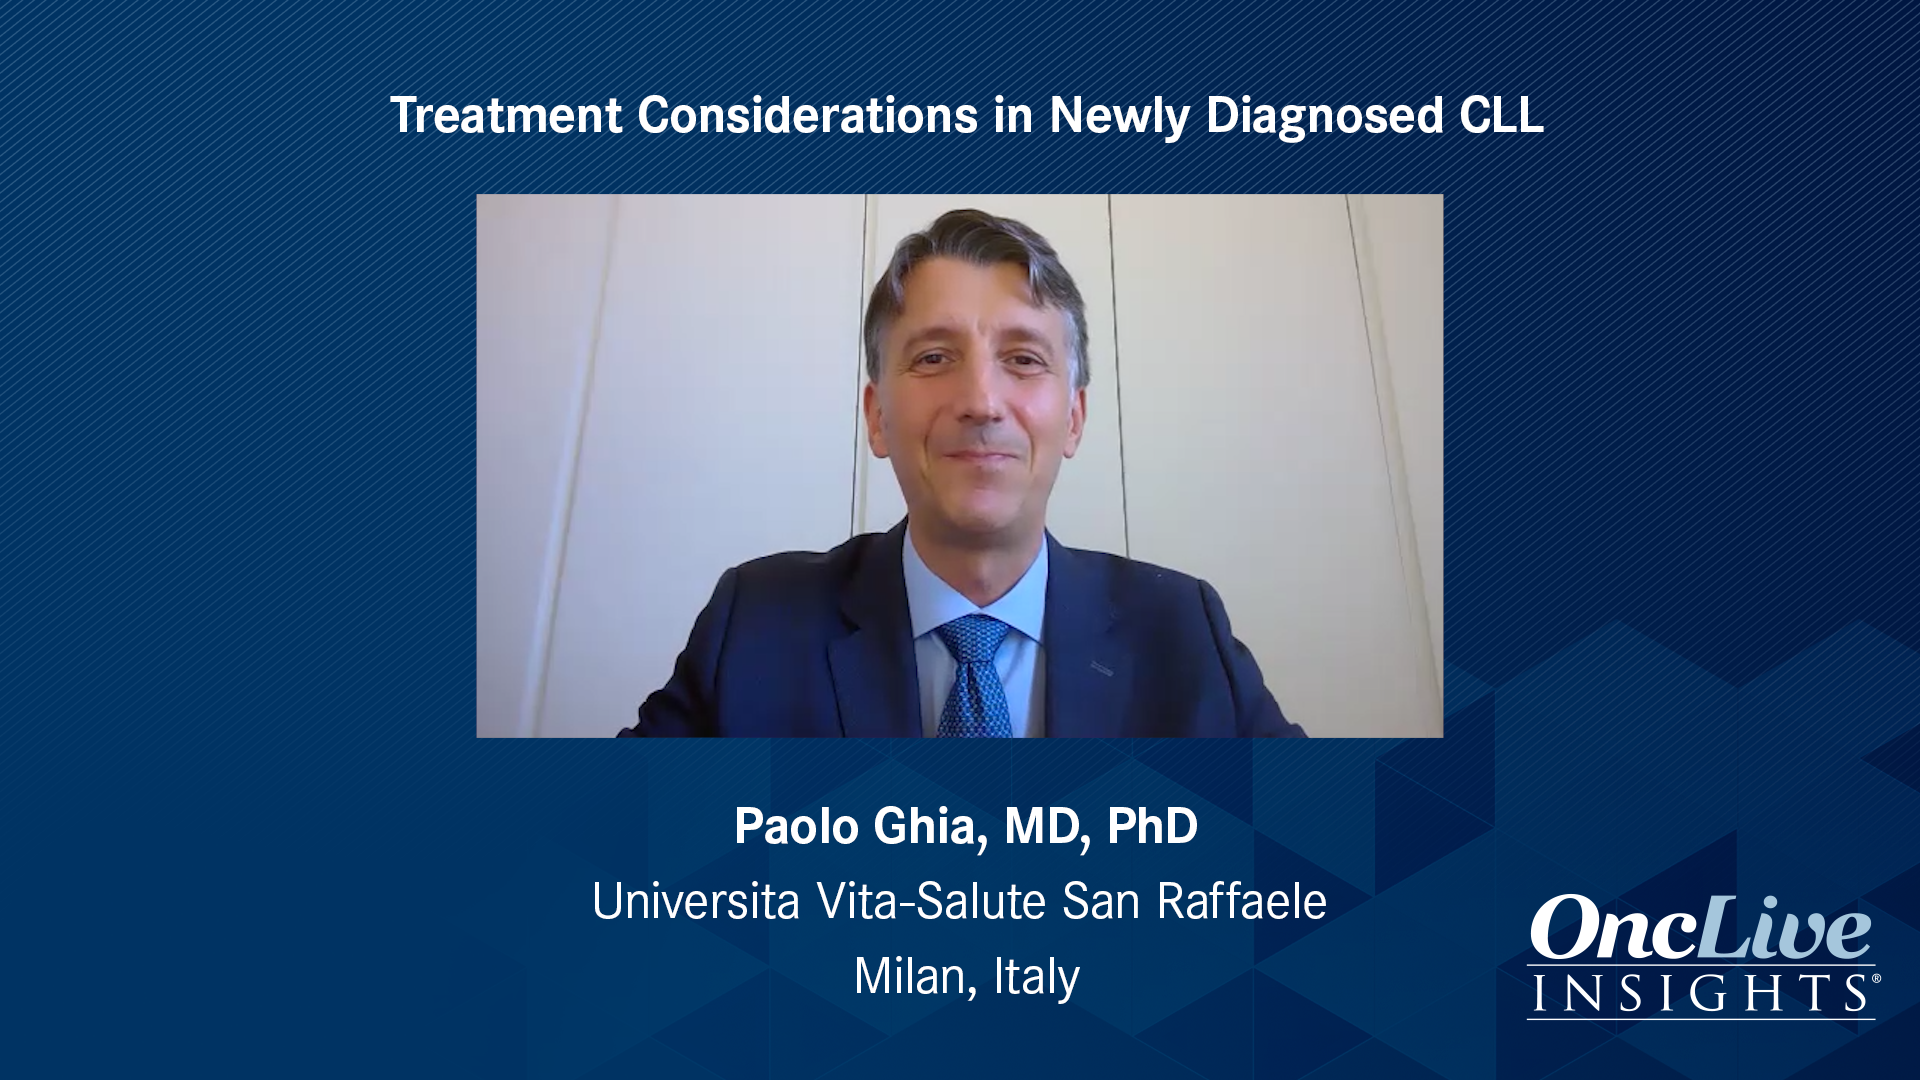 Treatment Options in Chronic Lymphocytic Leukemia: A Global Perspective 